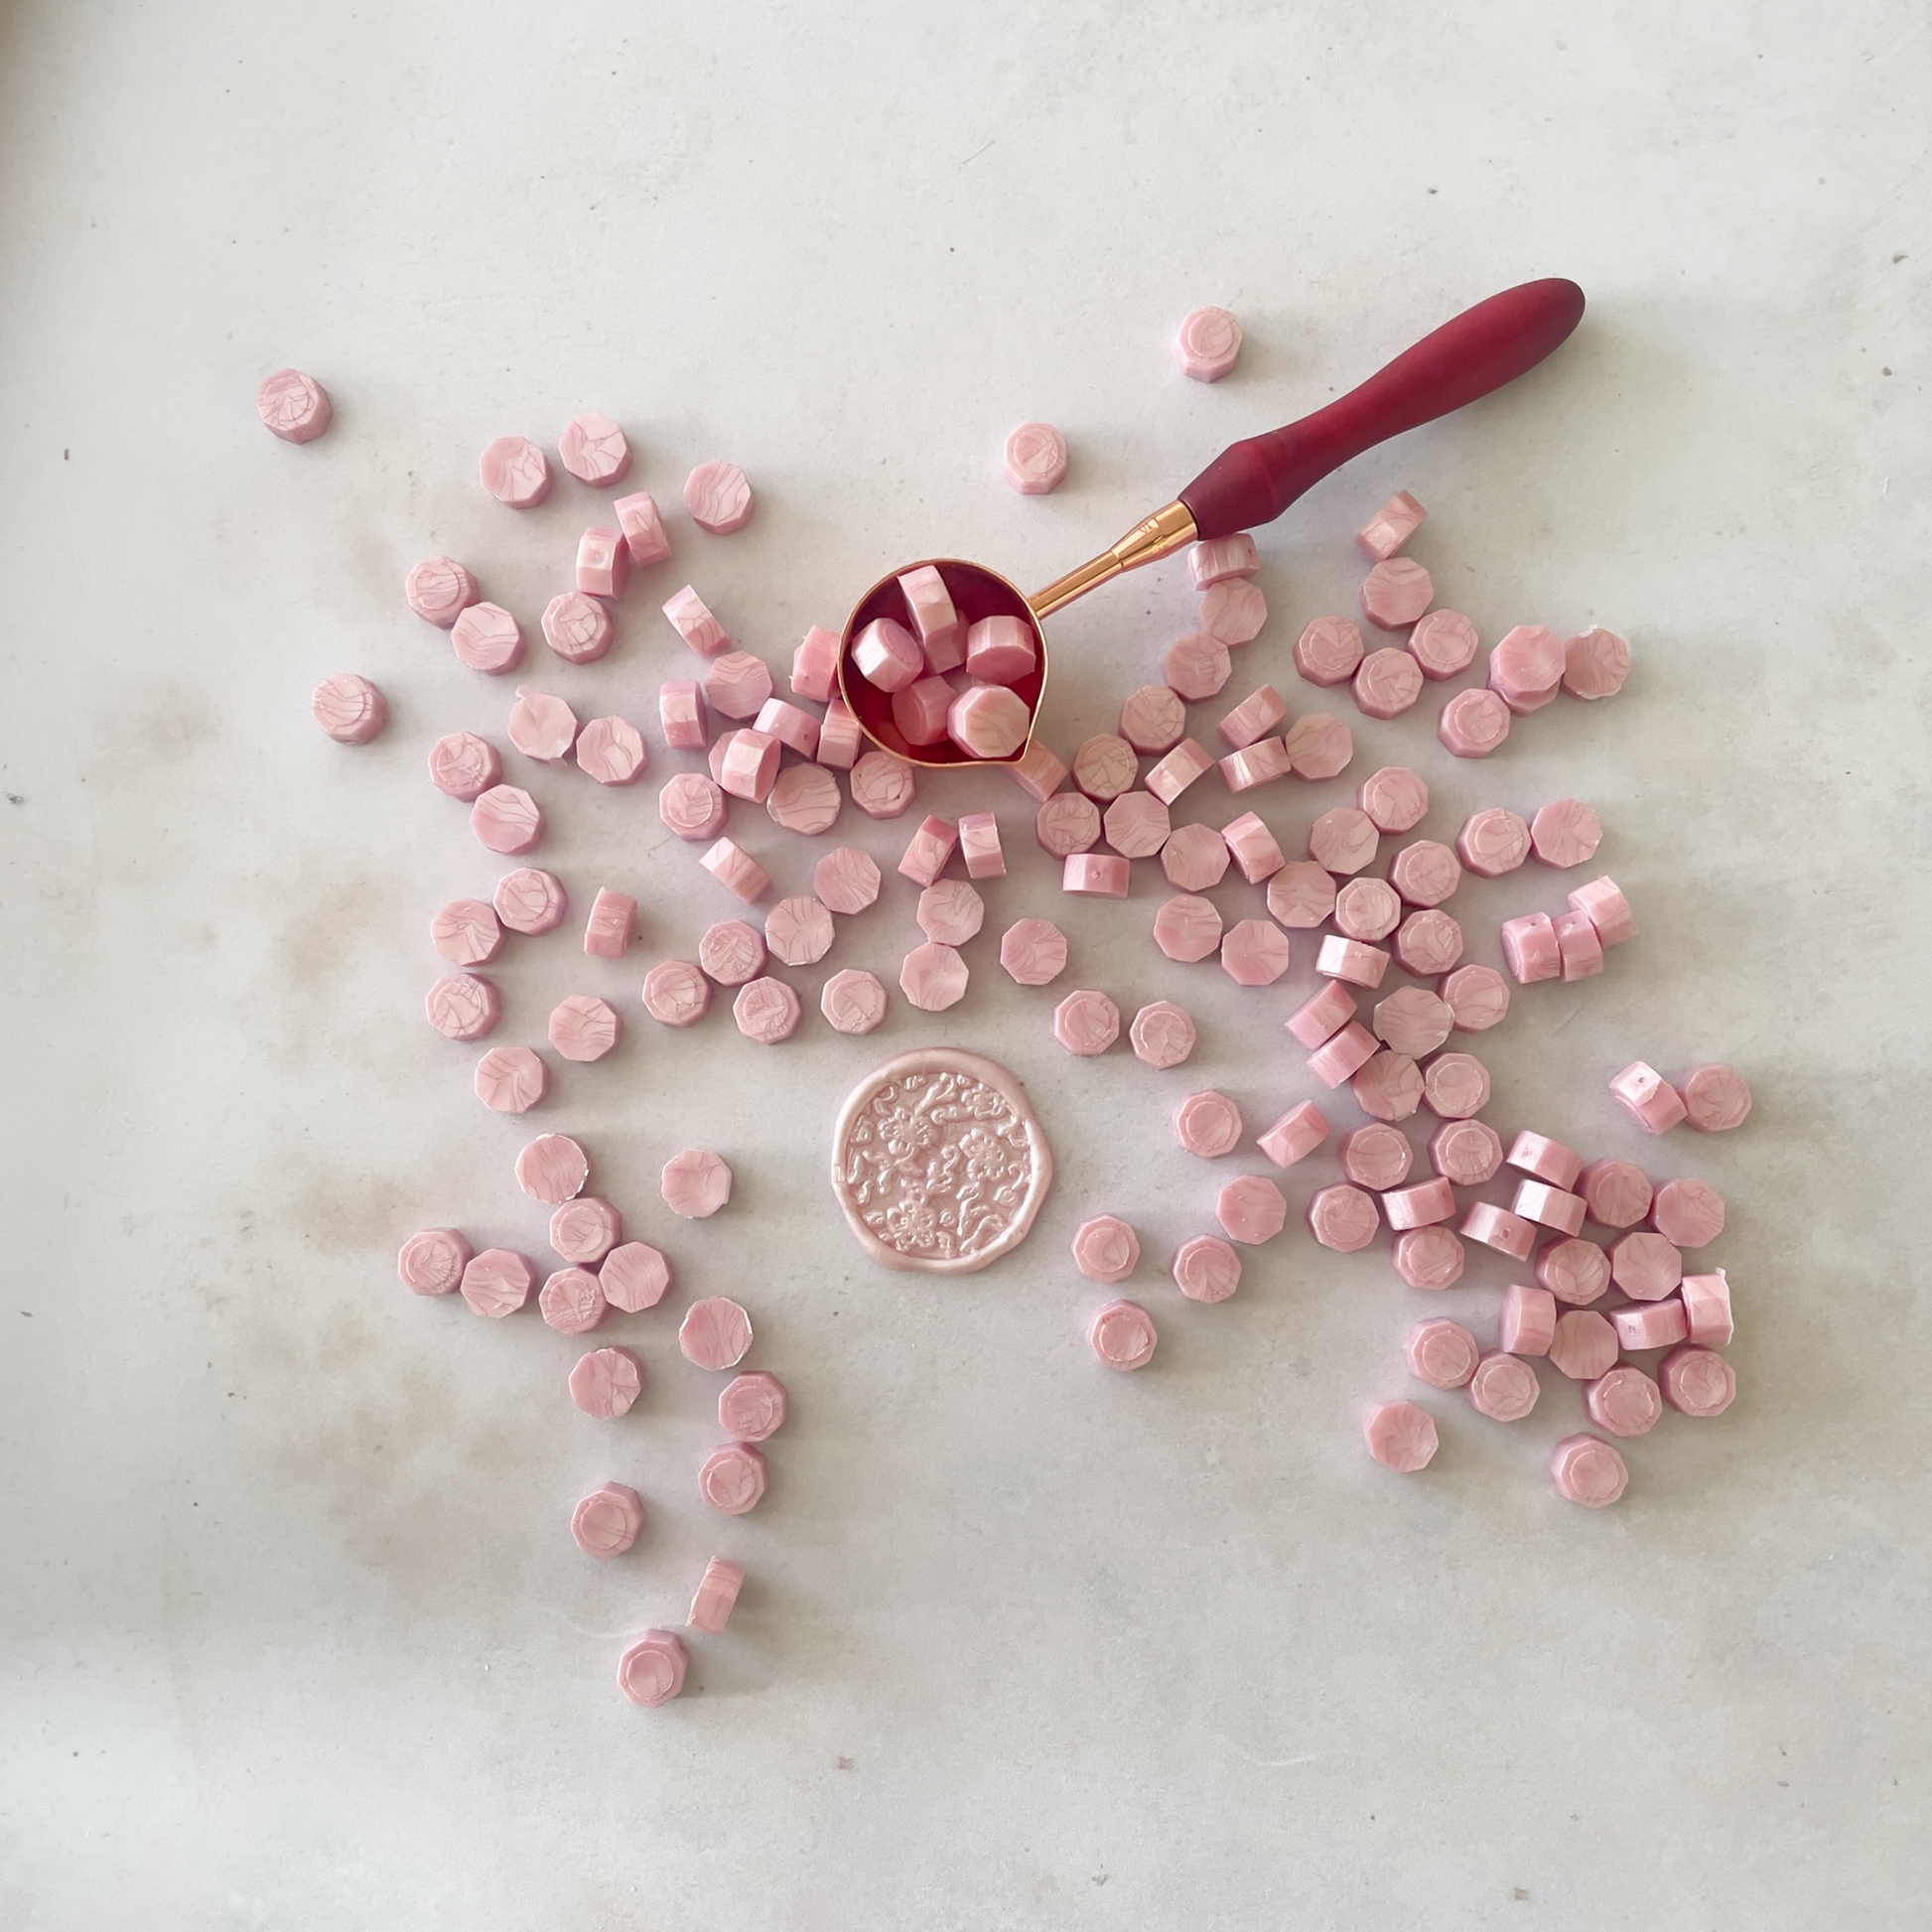 Peachy Pink Wax Beads from the Sealed by Spellbinders Collection